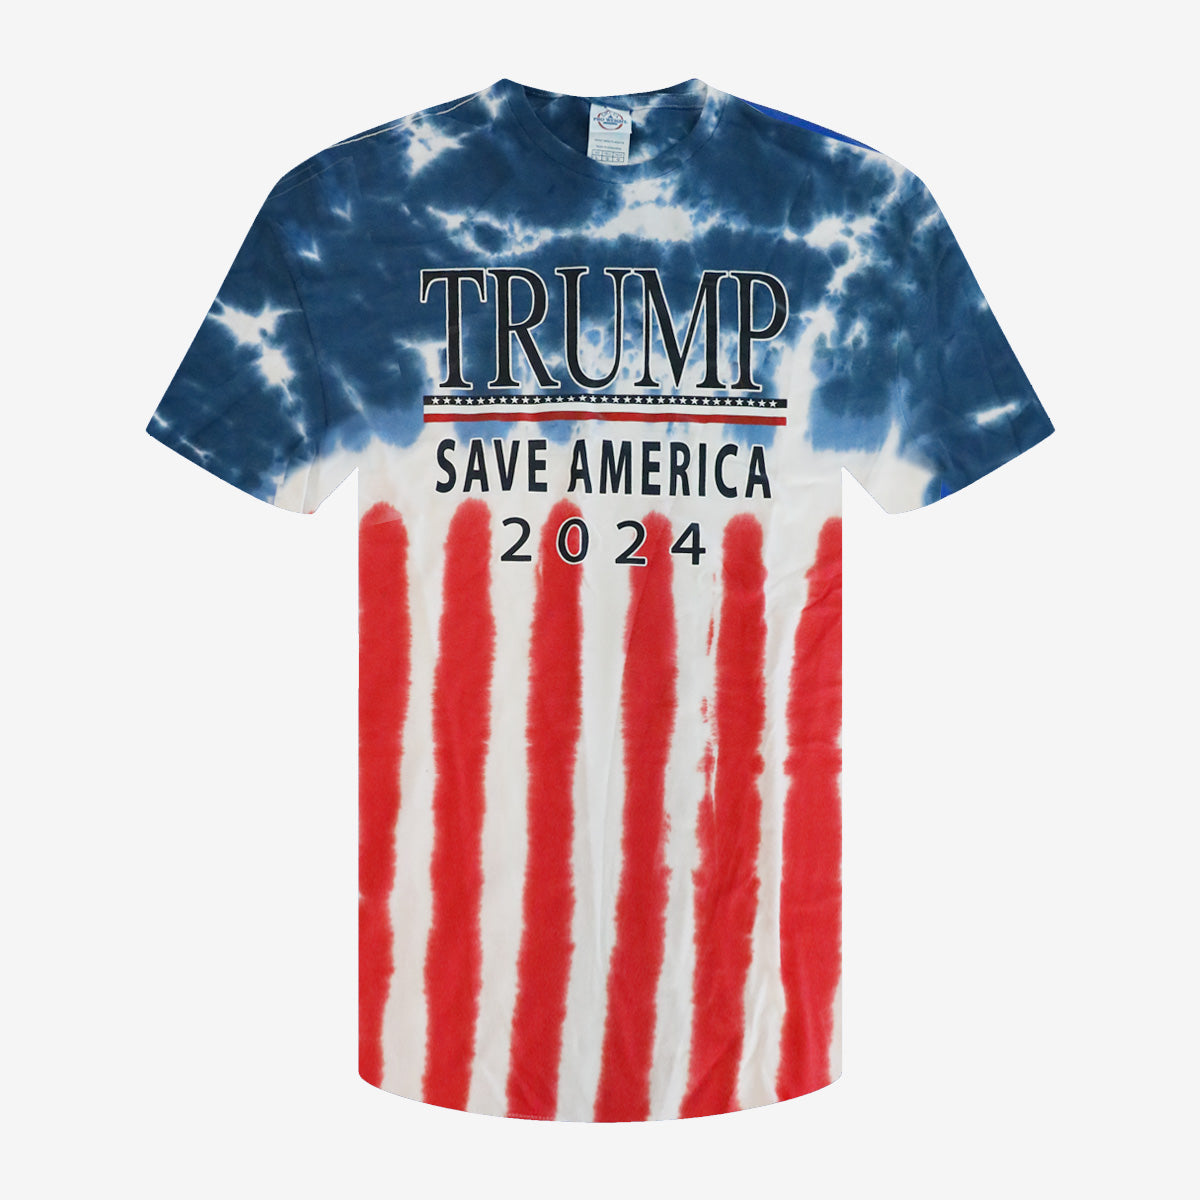 Limited Edition Trump Save America 2024 Tie Dye T-Shirt